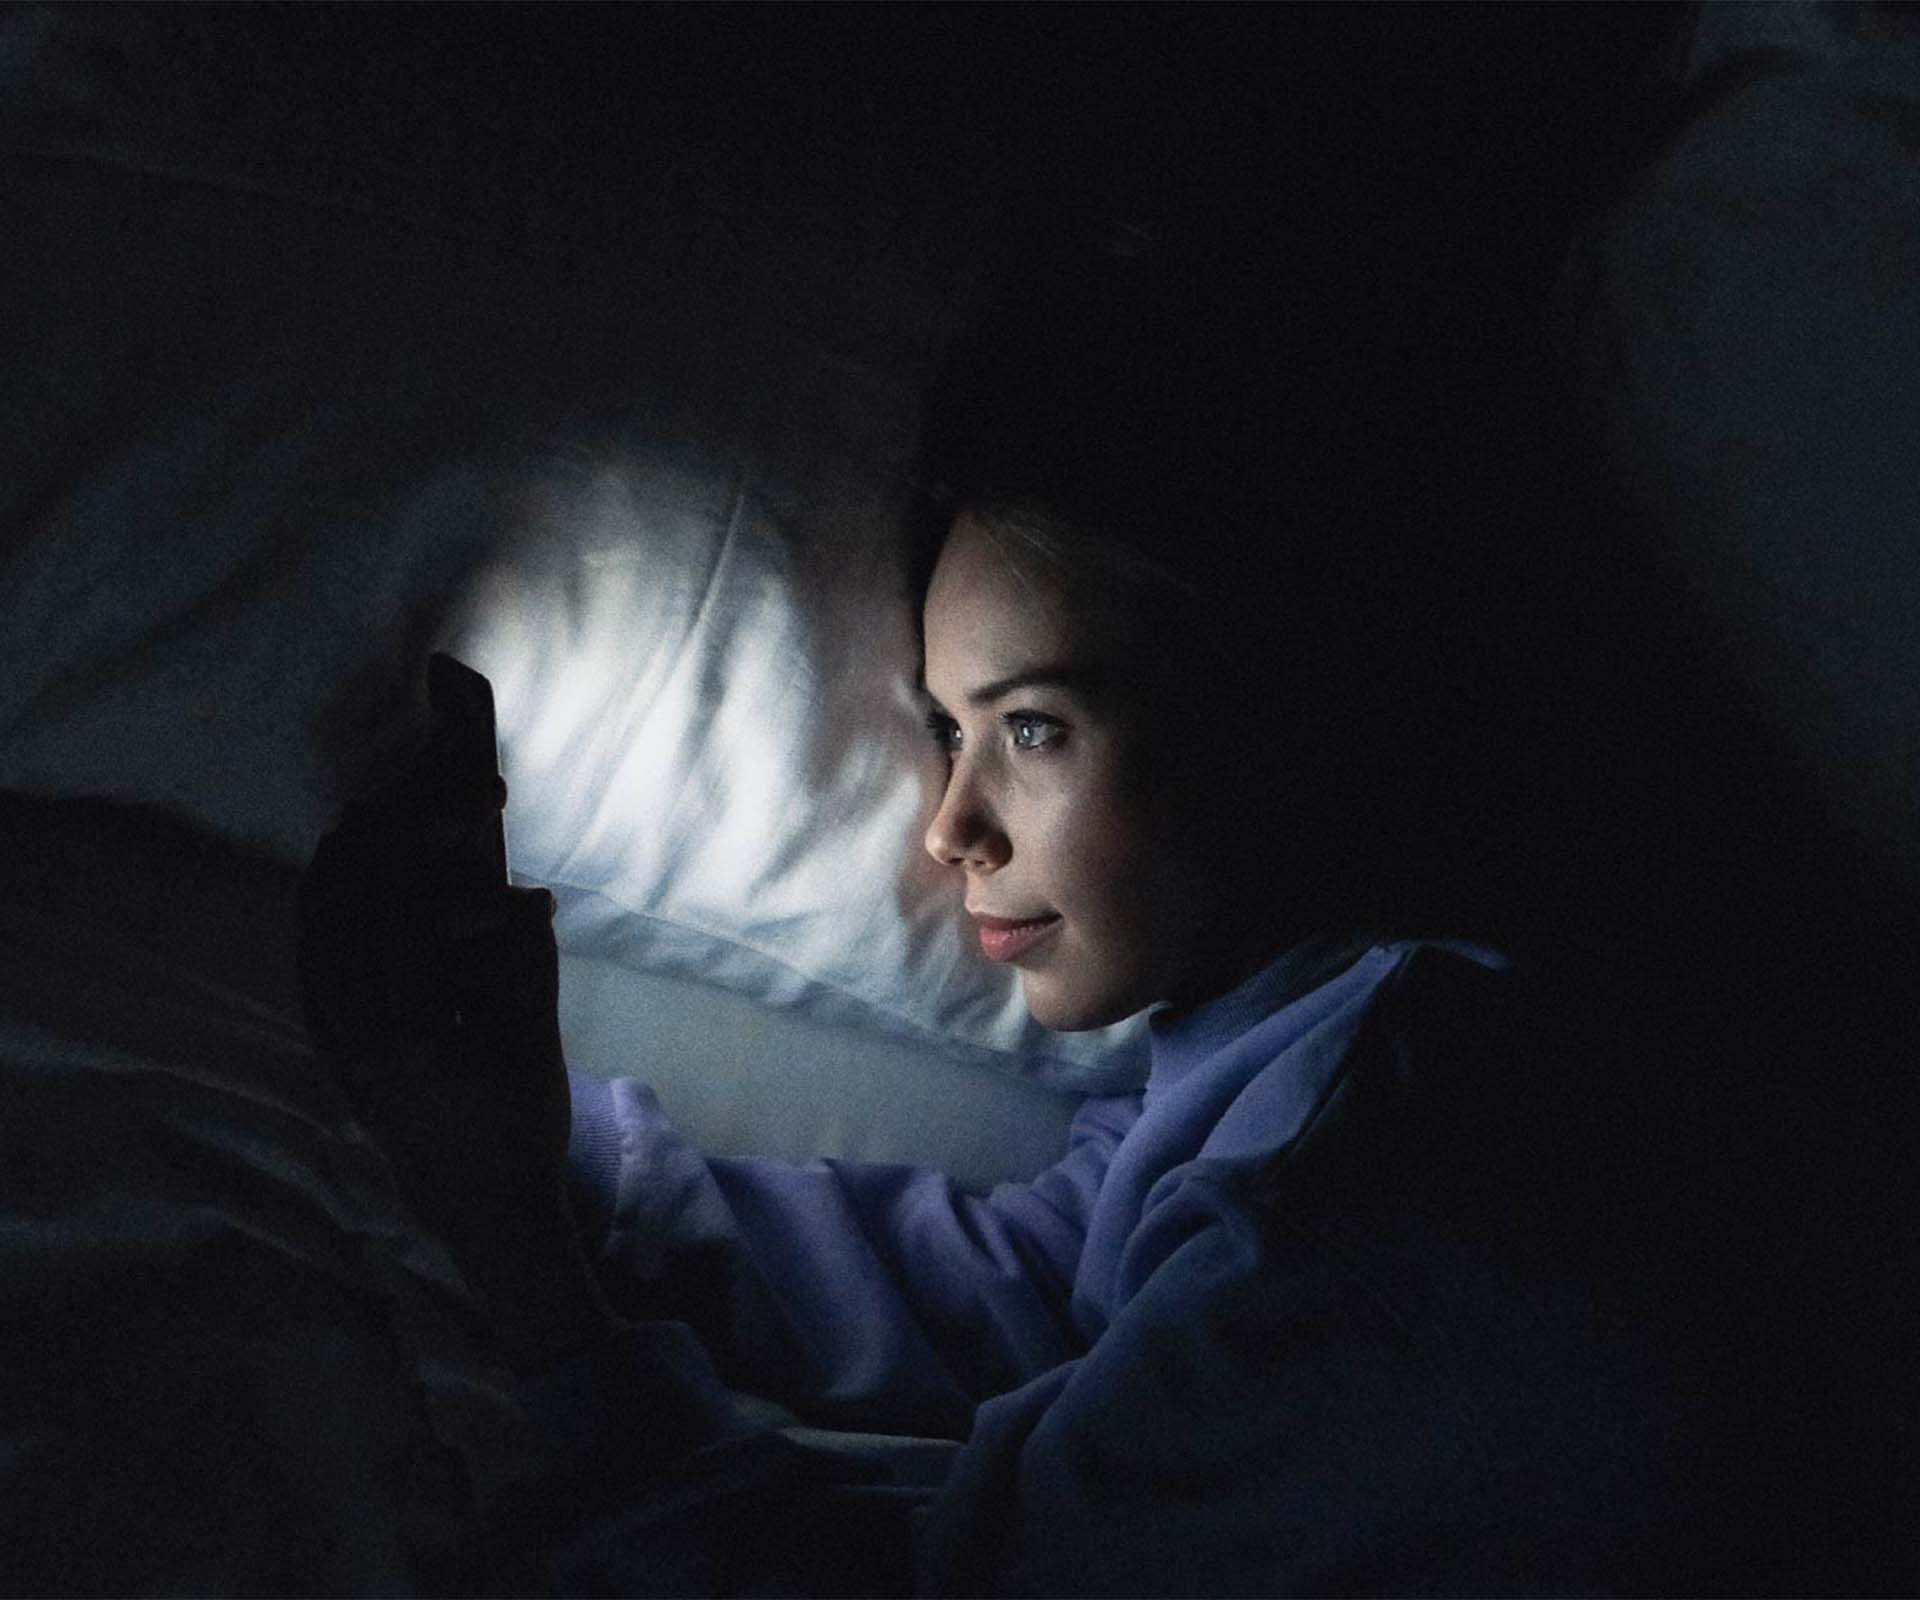 A woman in bed with her smartphone glowing in the night